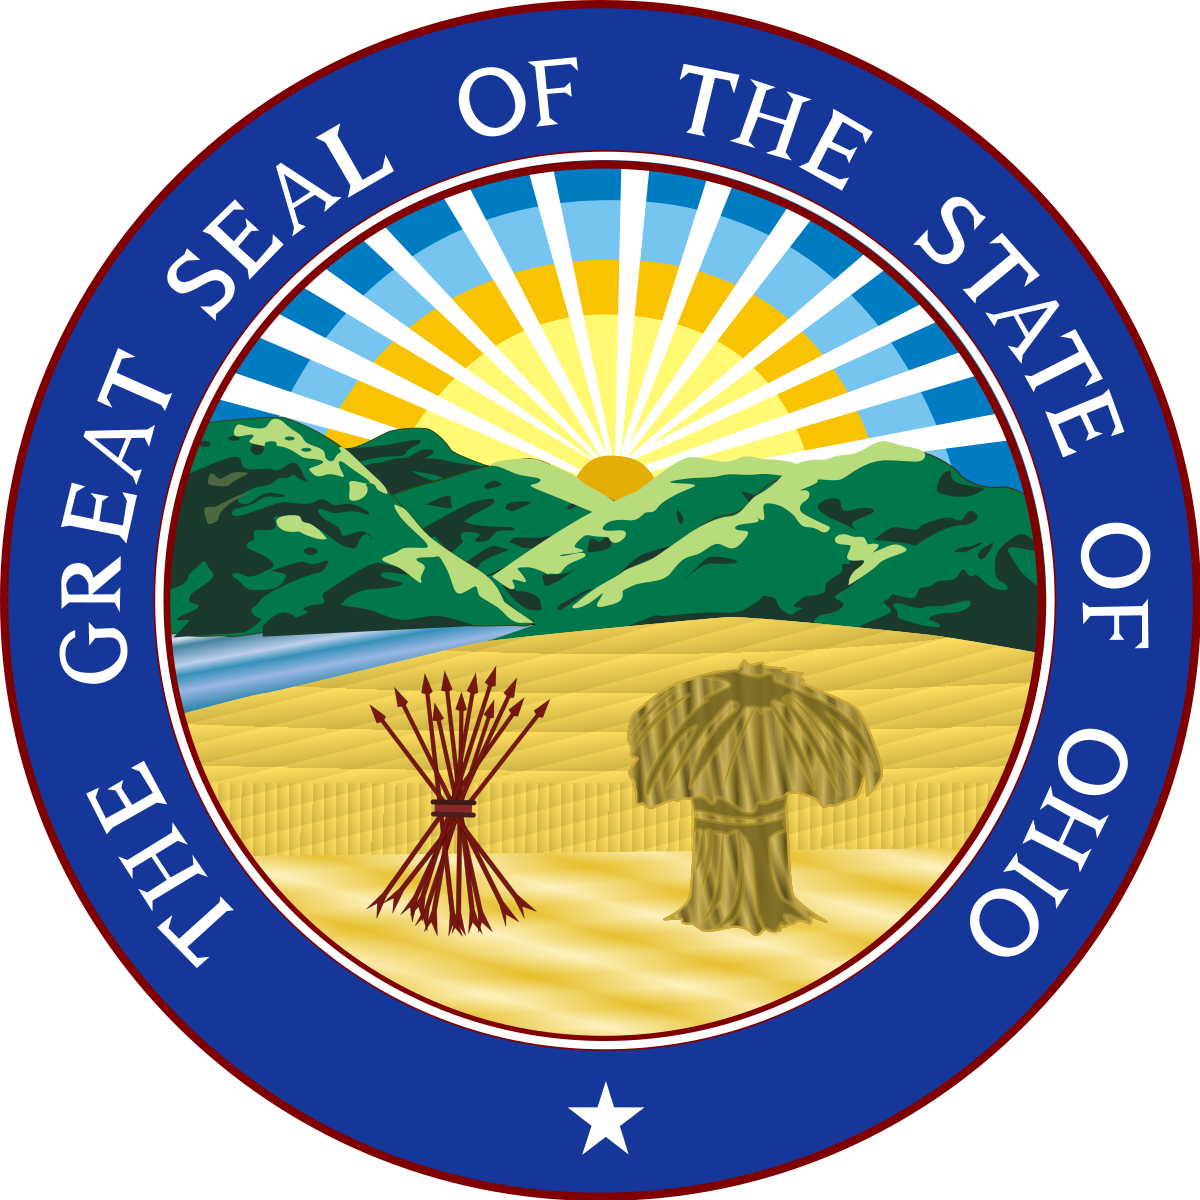 State of Ohio Seal